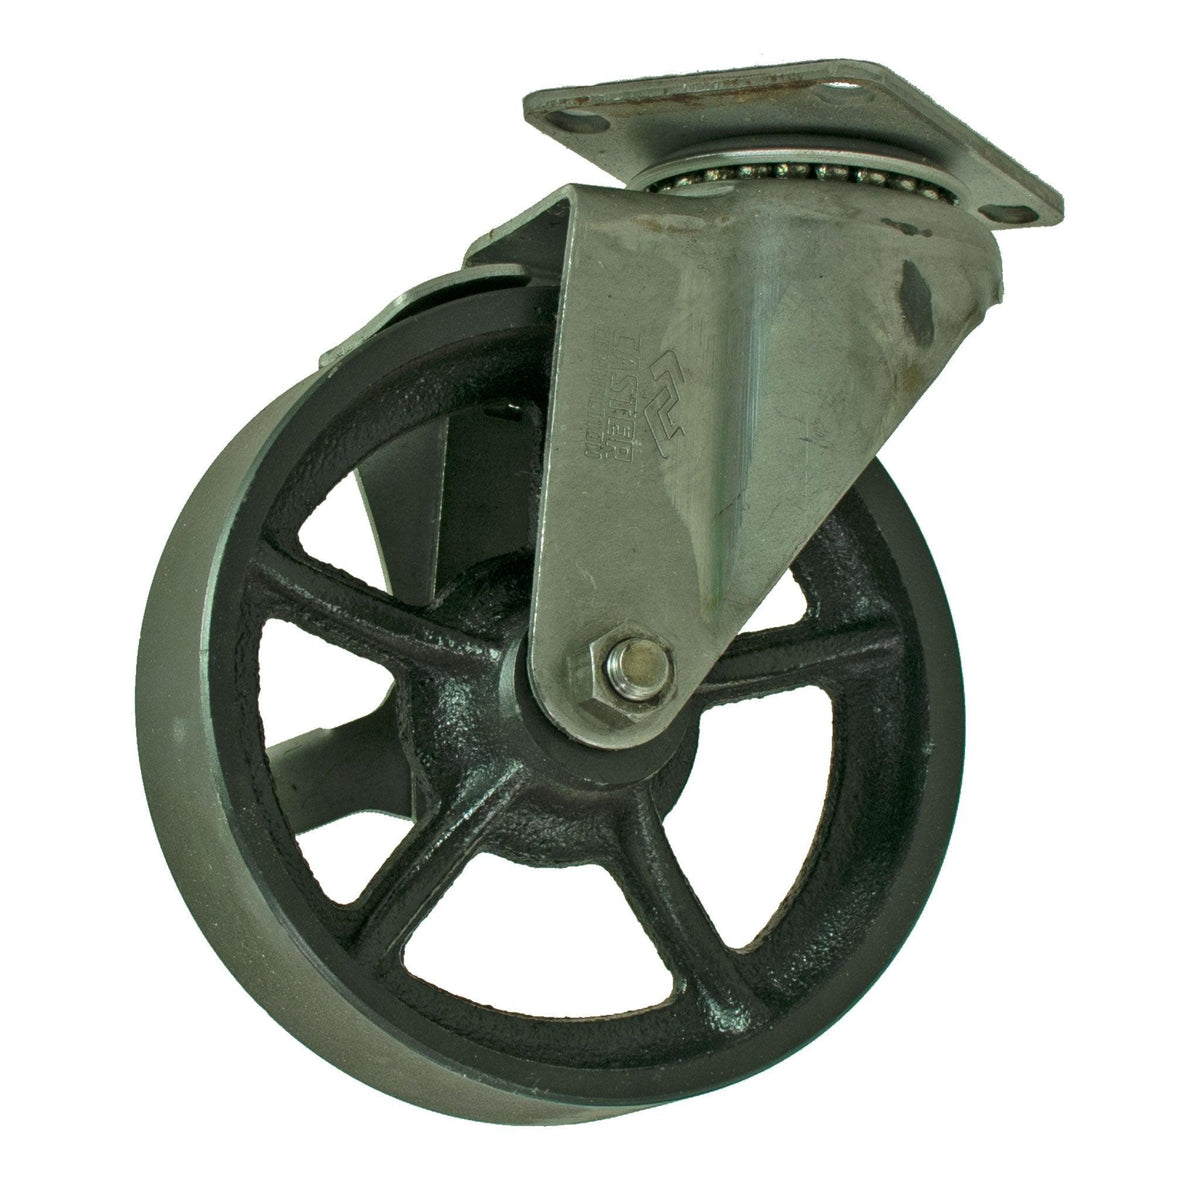 6in Vintage Casters have a brake on 1 side to lock the wheels in place